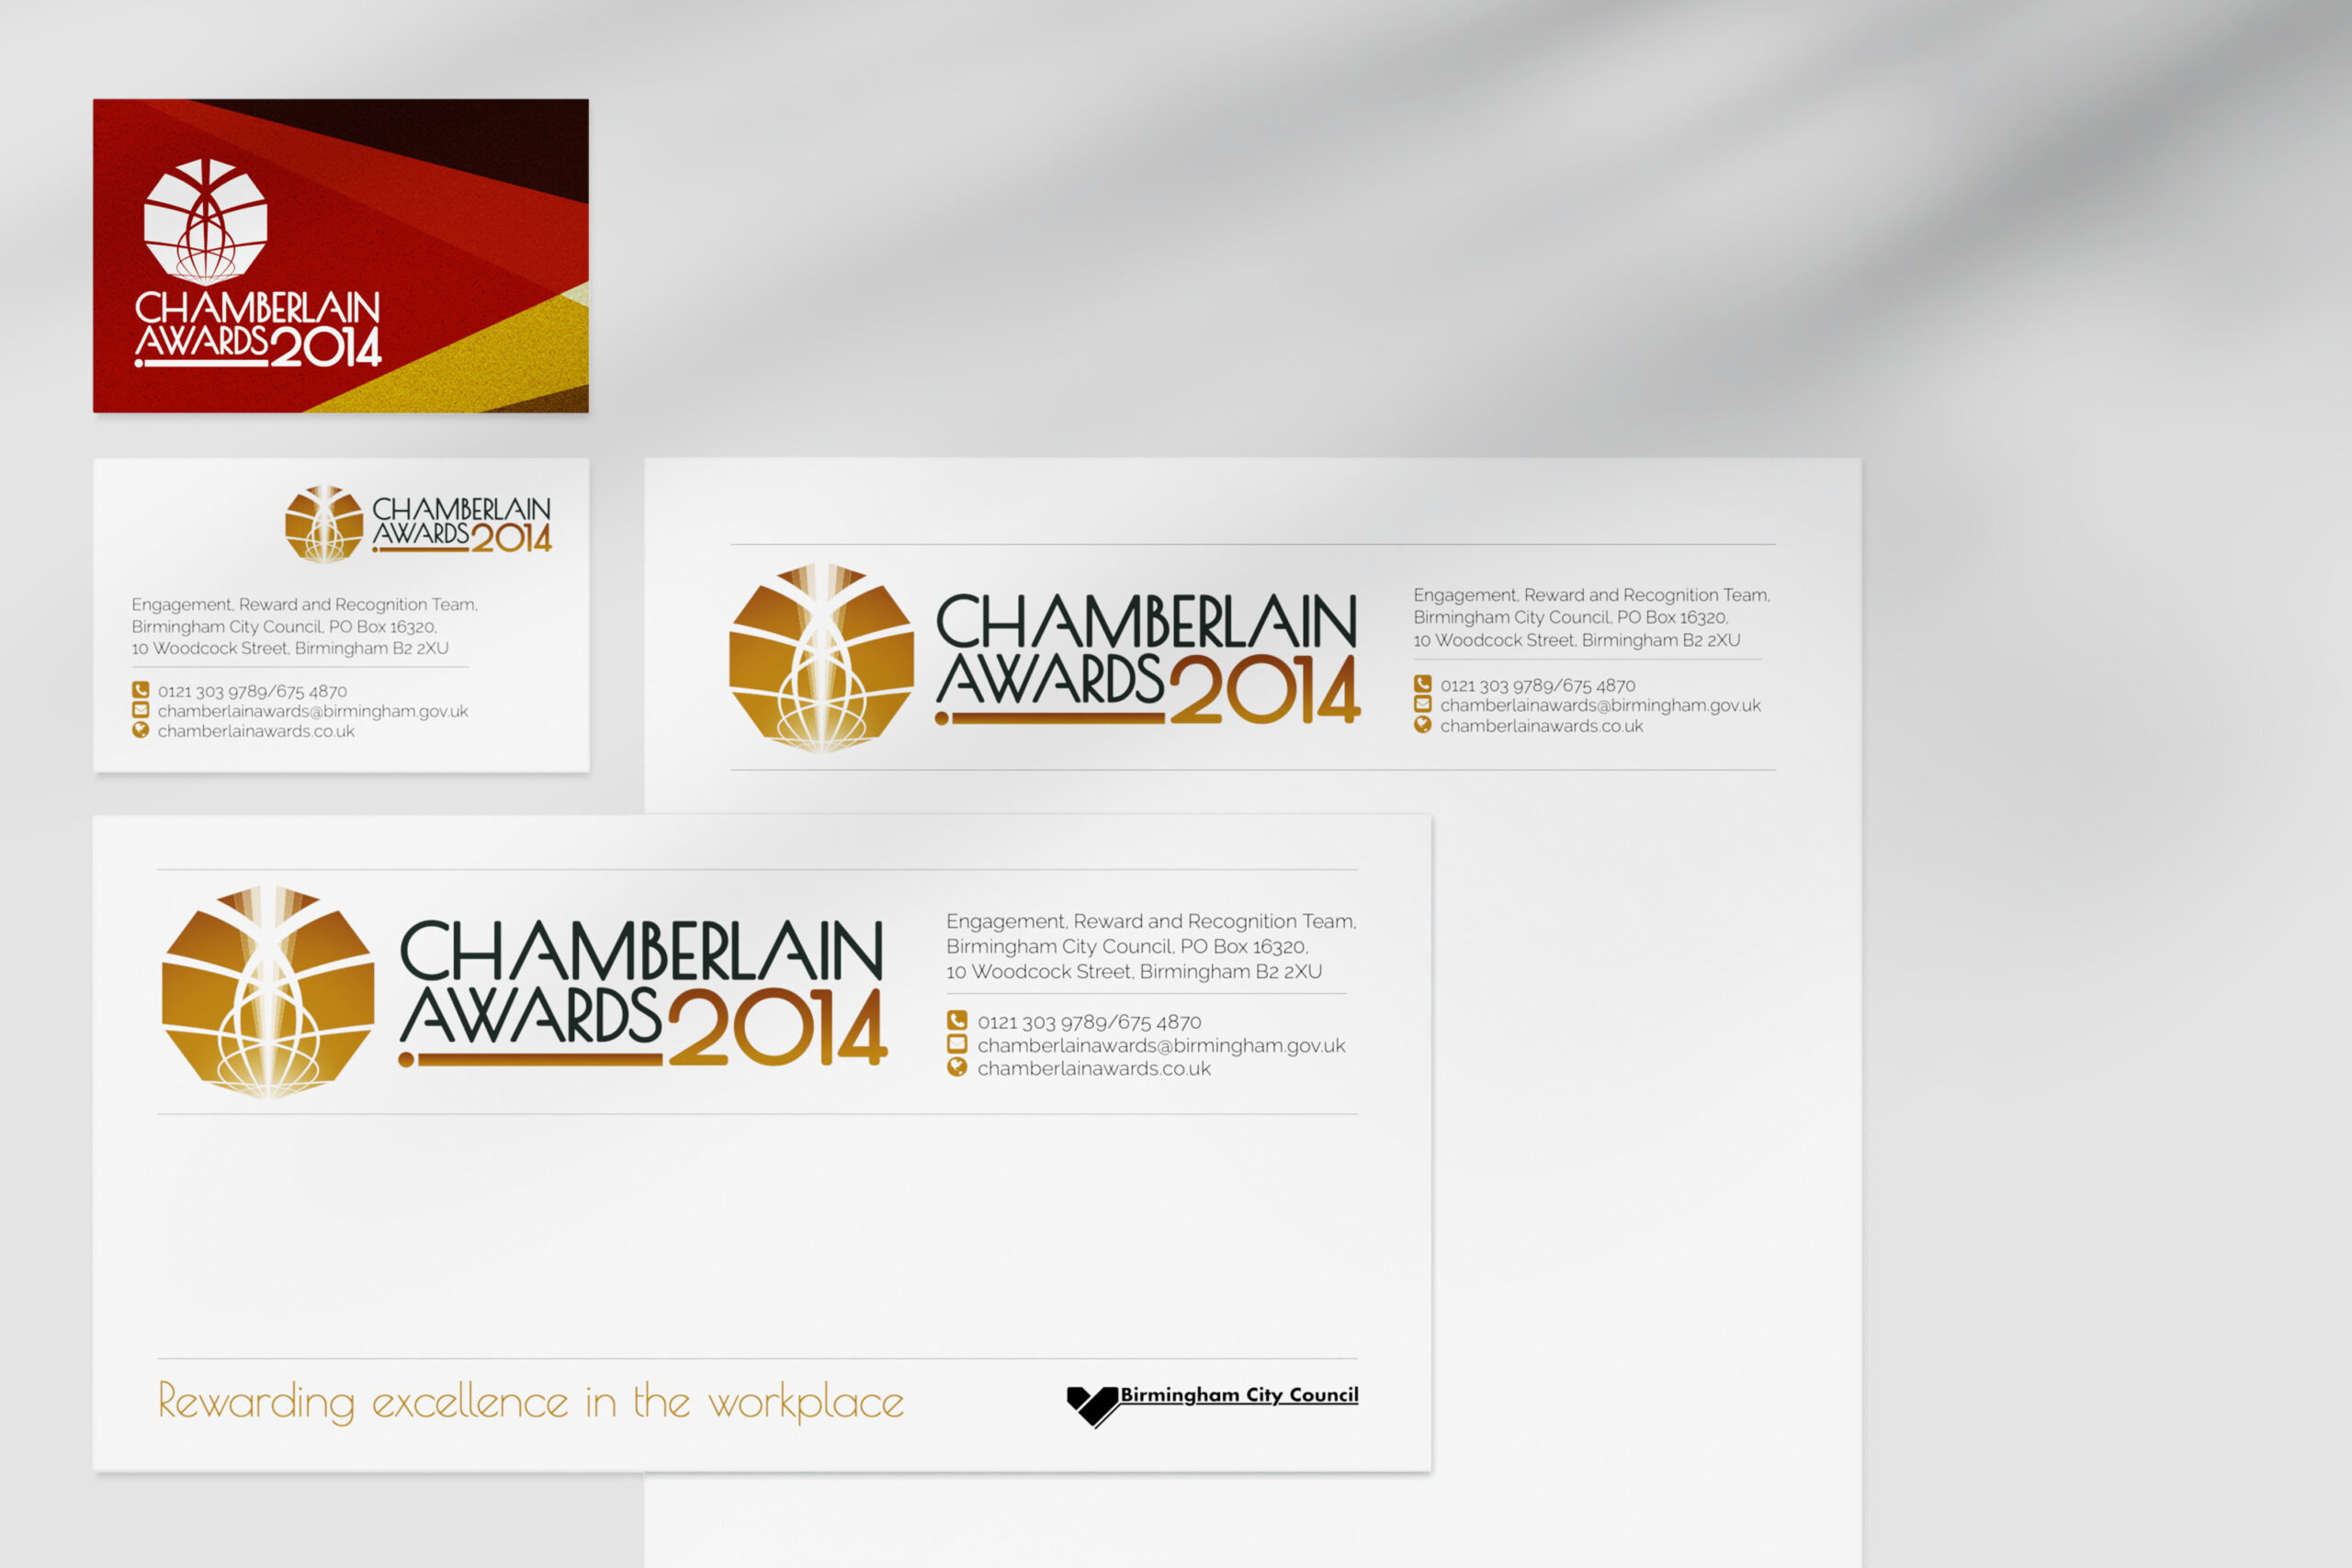 A Chamberlain Awards 2014 business card, compliment slip and letterhead arranged in a grid on a light grey background